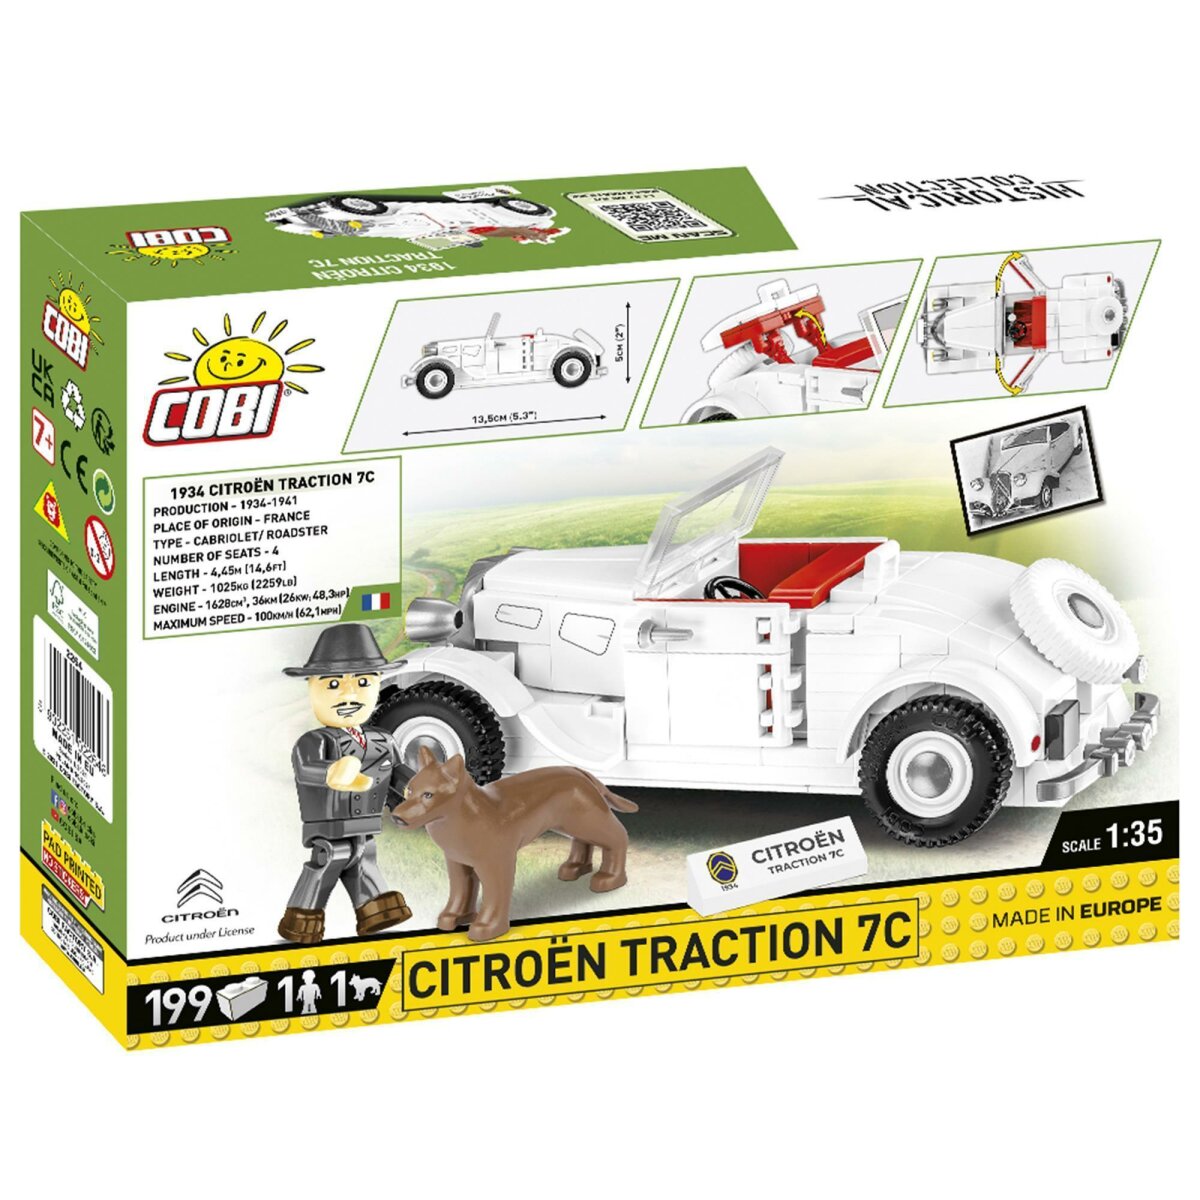 COBI 2264-Historical Collection-CITROEN TRACTION 7c CABRIOLET-NUOVO 